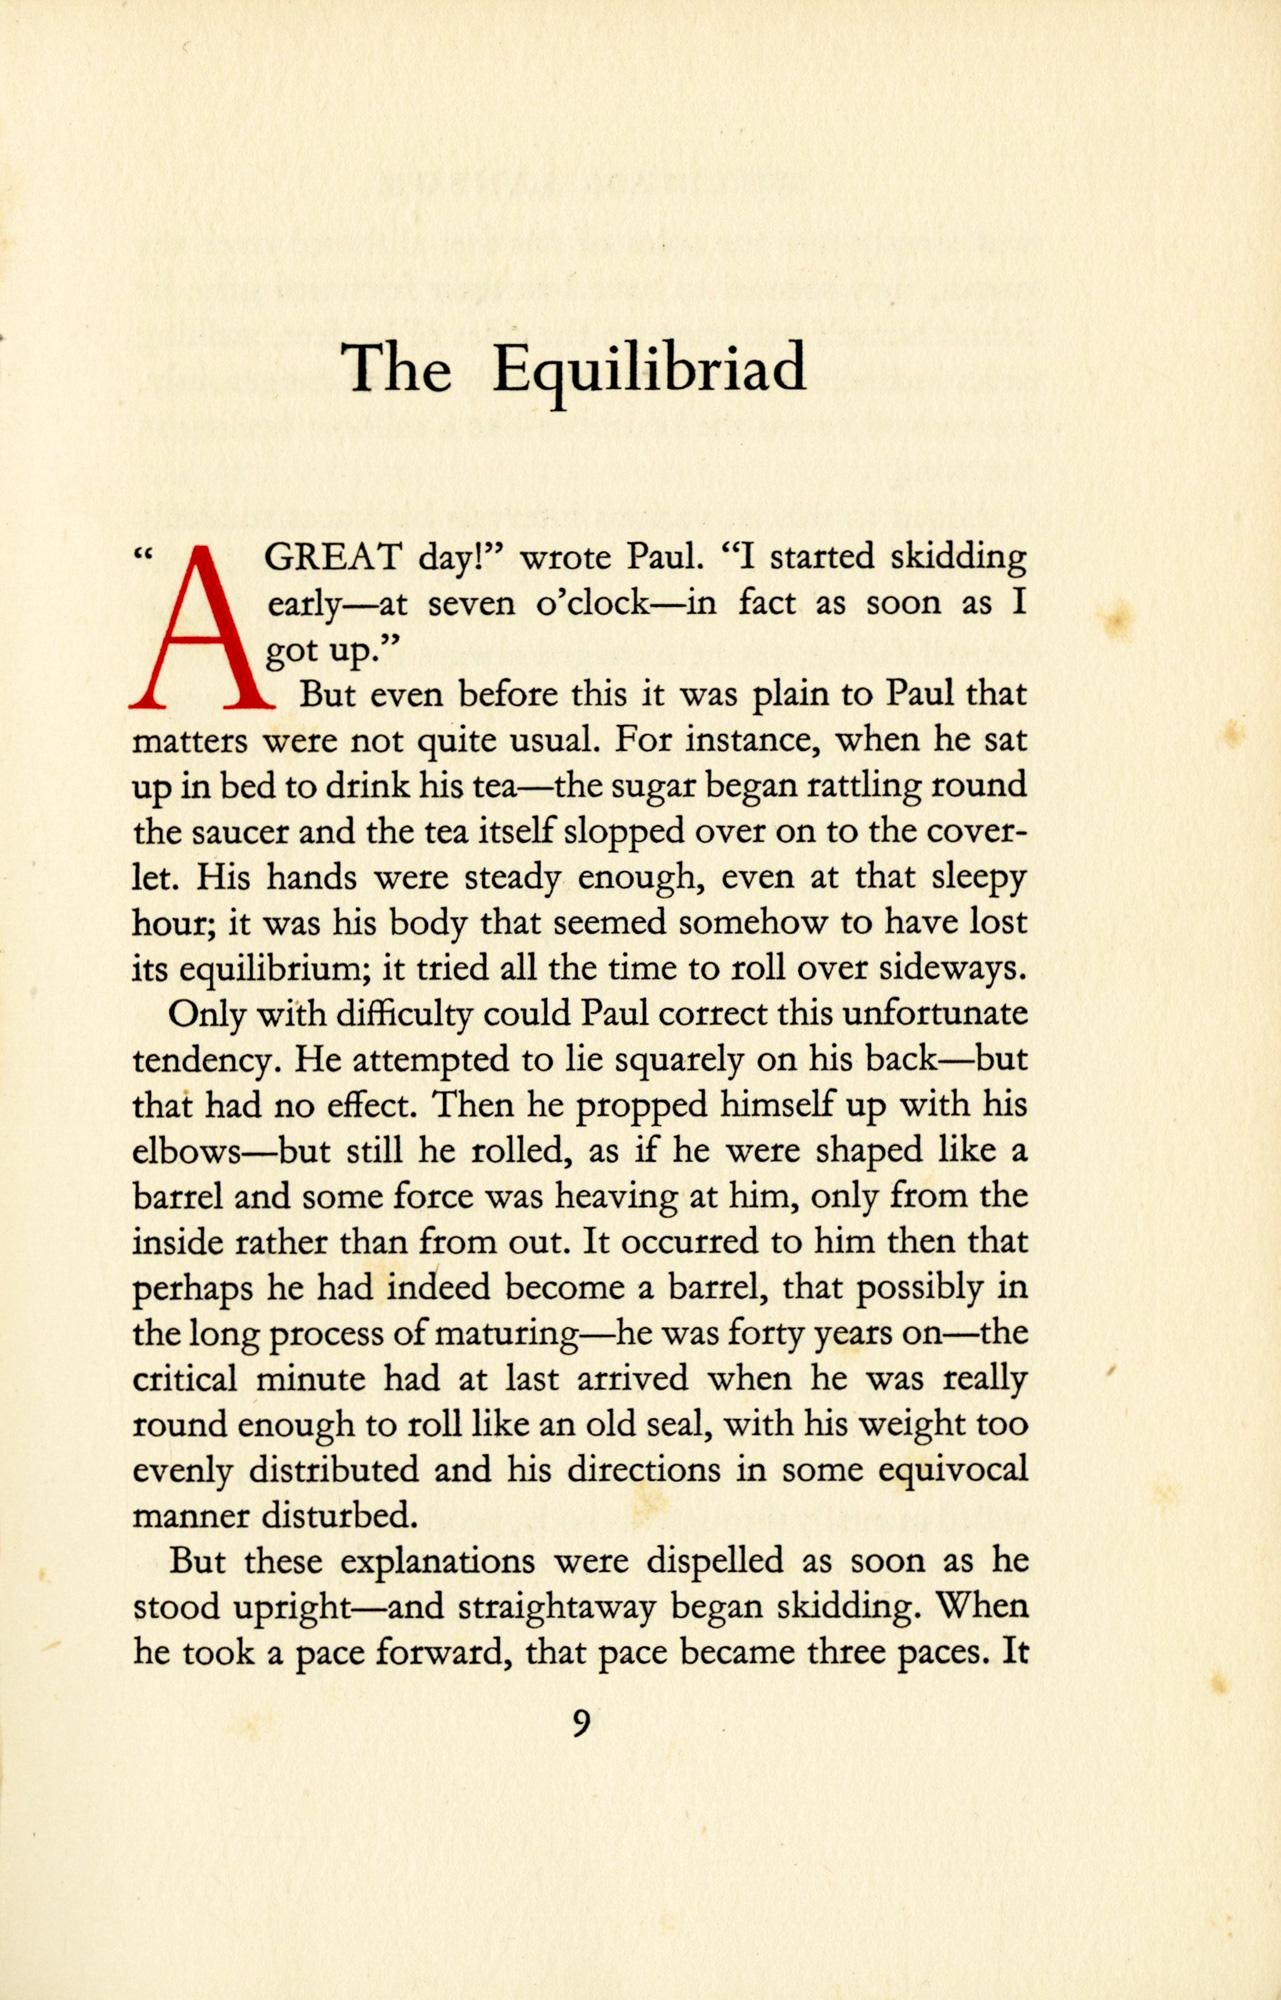 THE EQUILIBRIAD by William Samsons with illustrations by Lucian Freud. 
London: Hogarth Press, 1948. Limited Edition. 
8vo, 8 5/8 x 5 5/8 in (220 x 140 mm); pp. 46 + 5 full-page BW plates FROM DRAWINGS by LUCIAN FREUD; title and initials in red